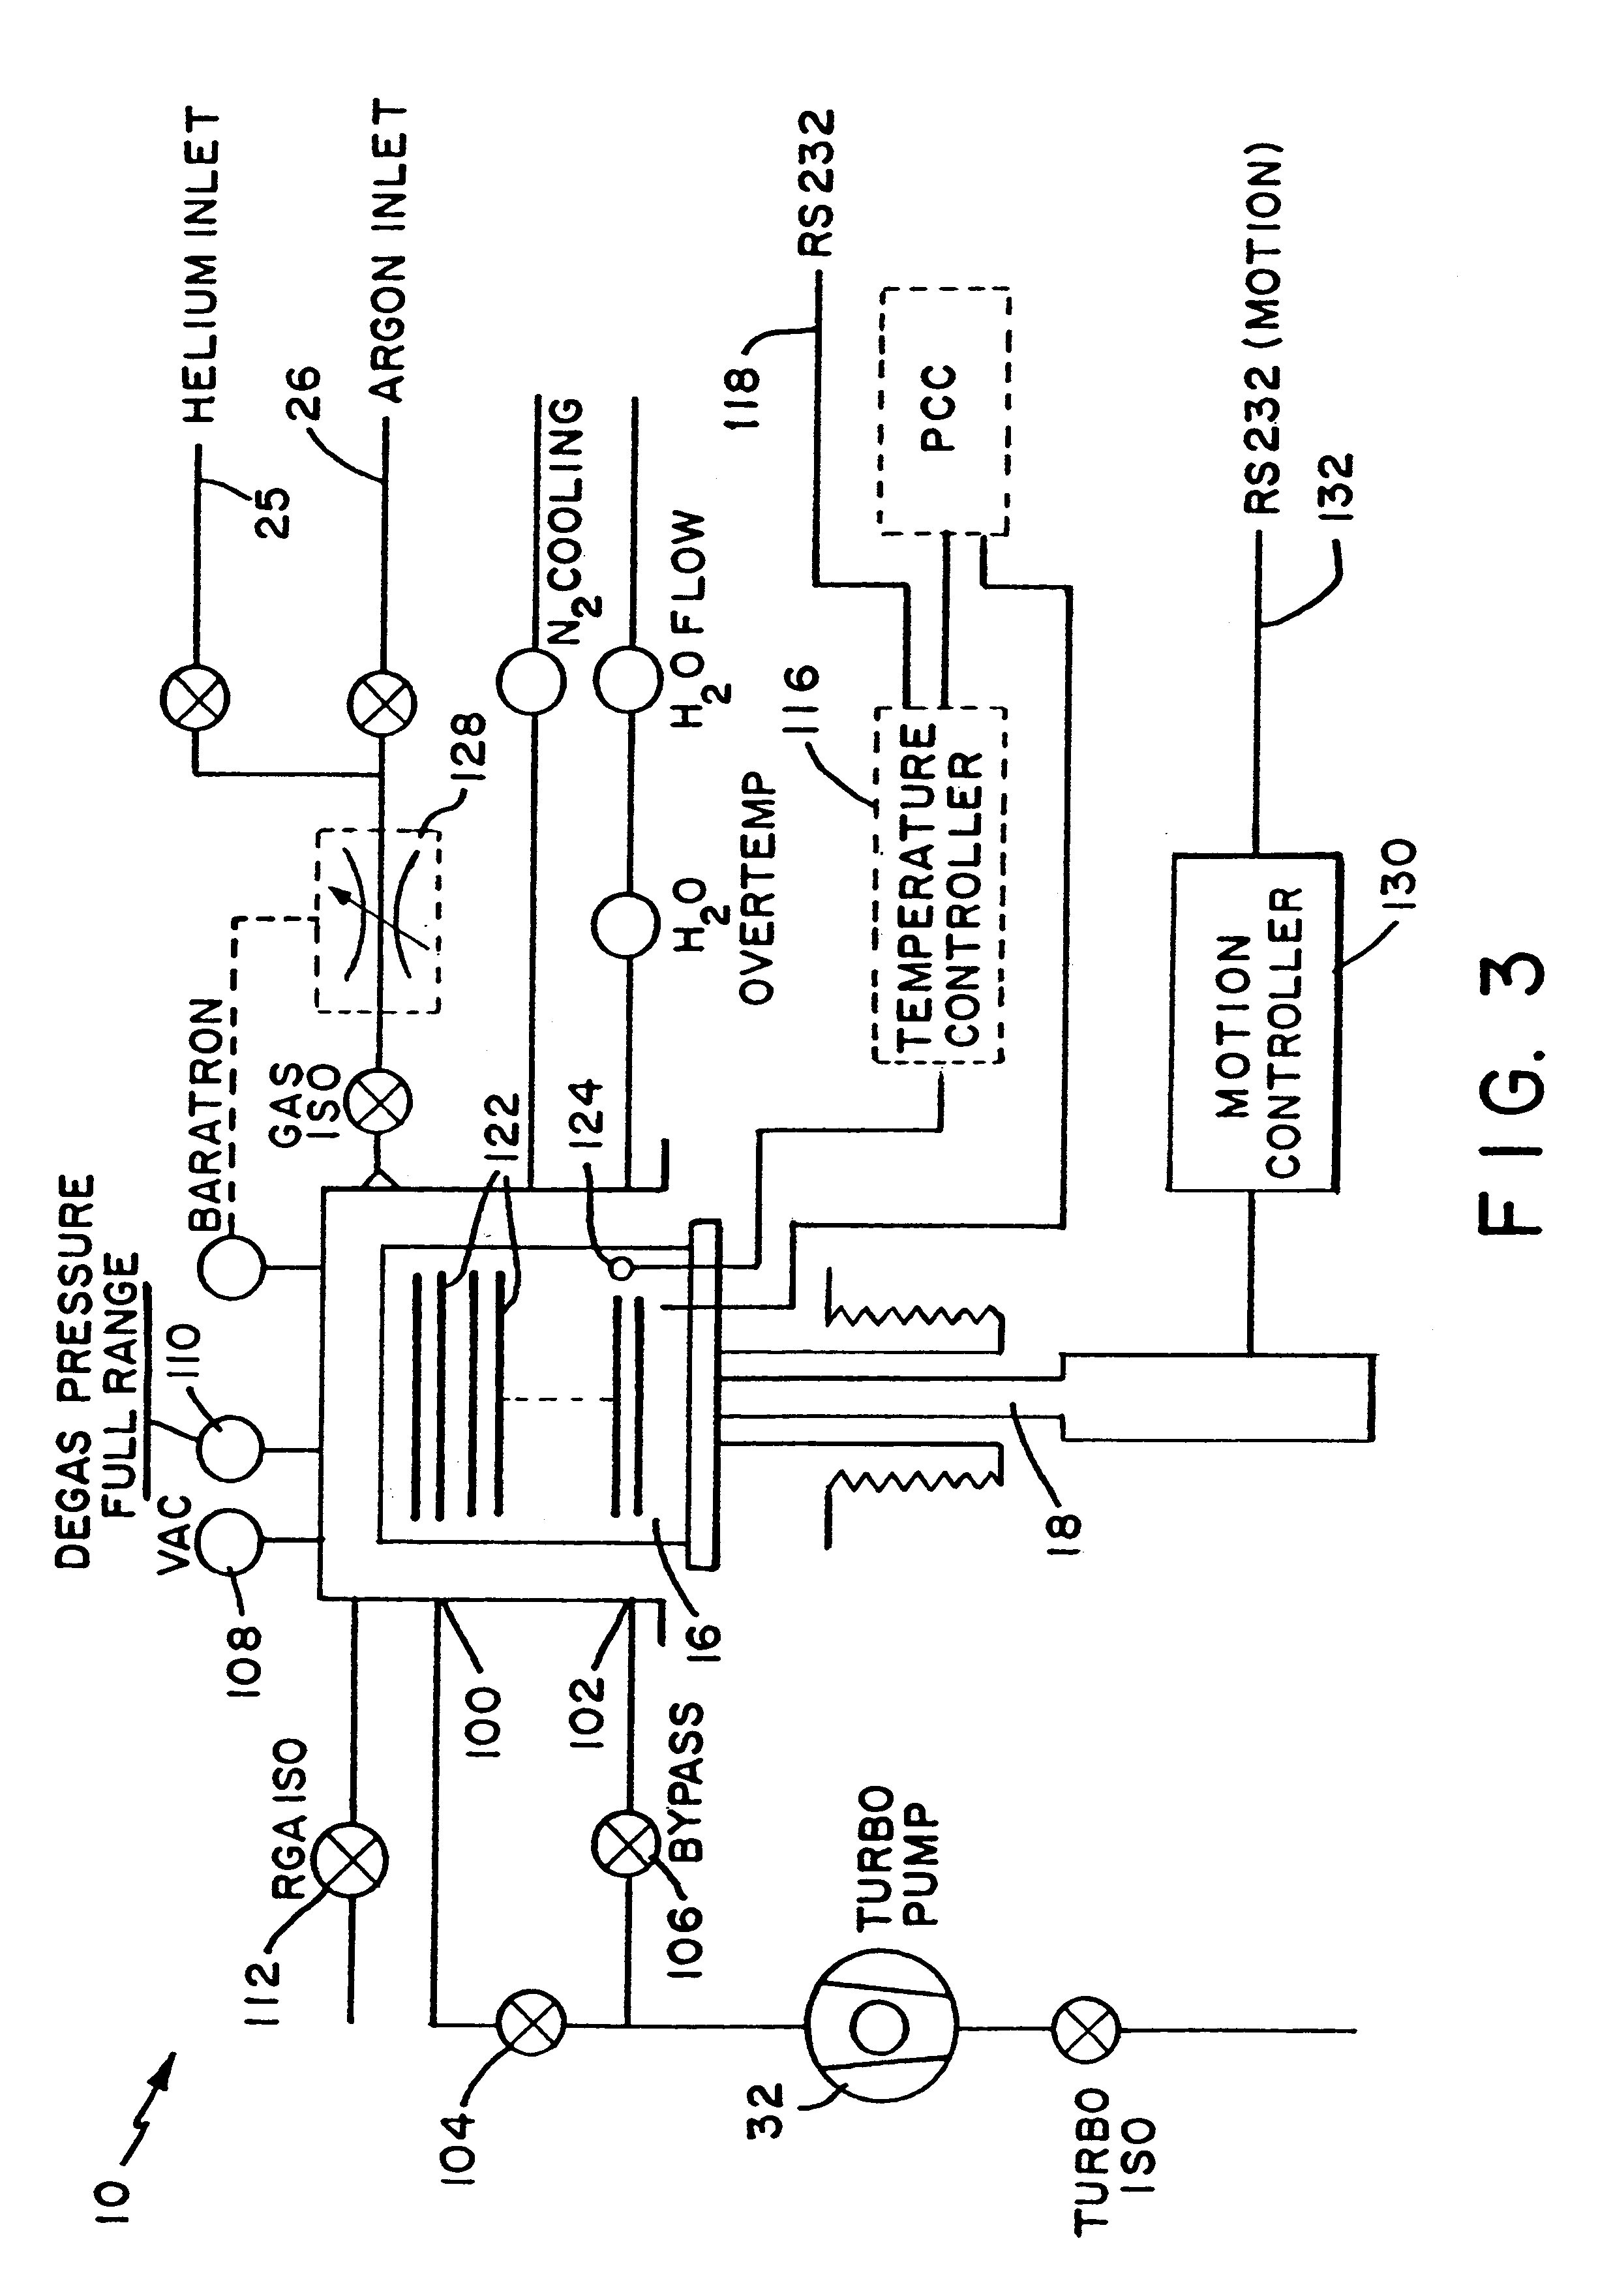 Apparatus and method for enhanced degassing of semiconductor wafers for increased throughput